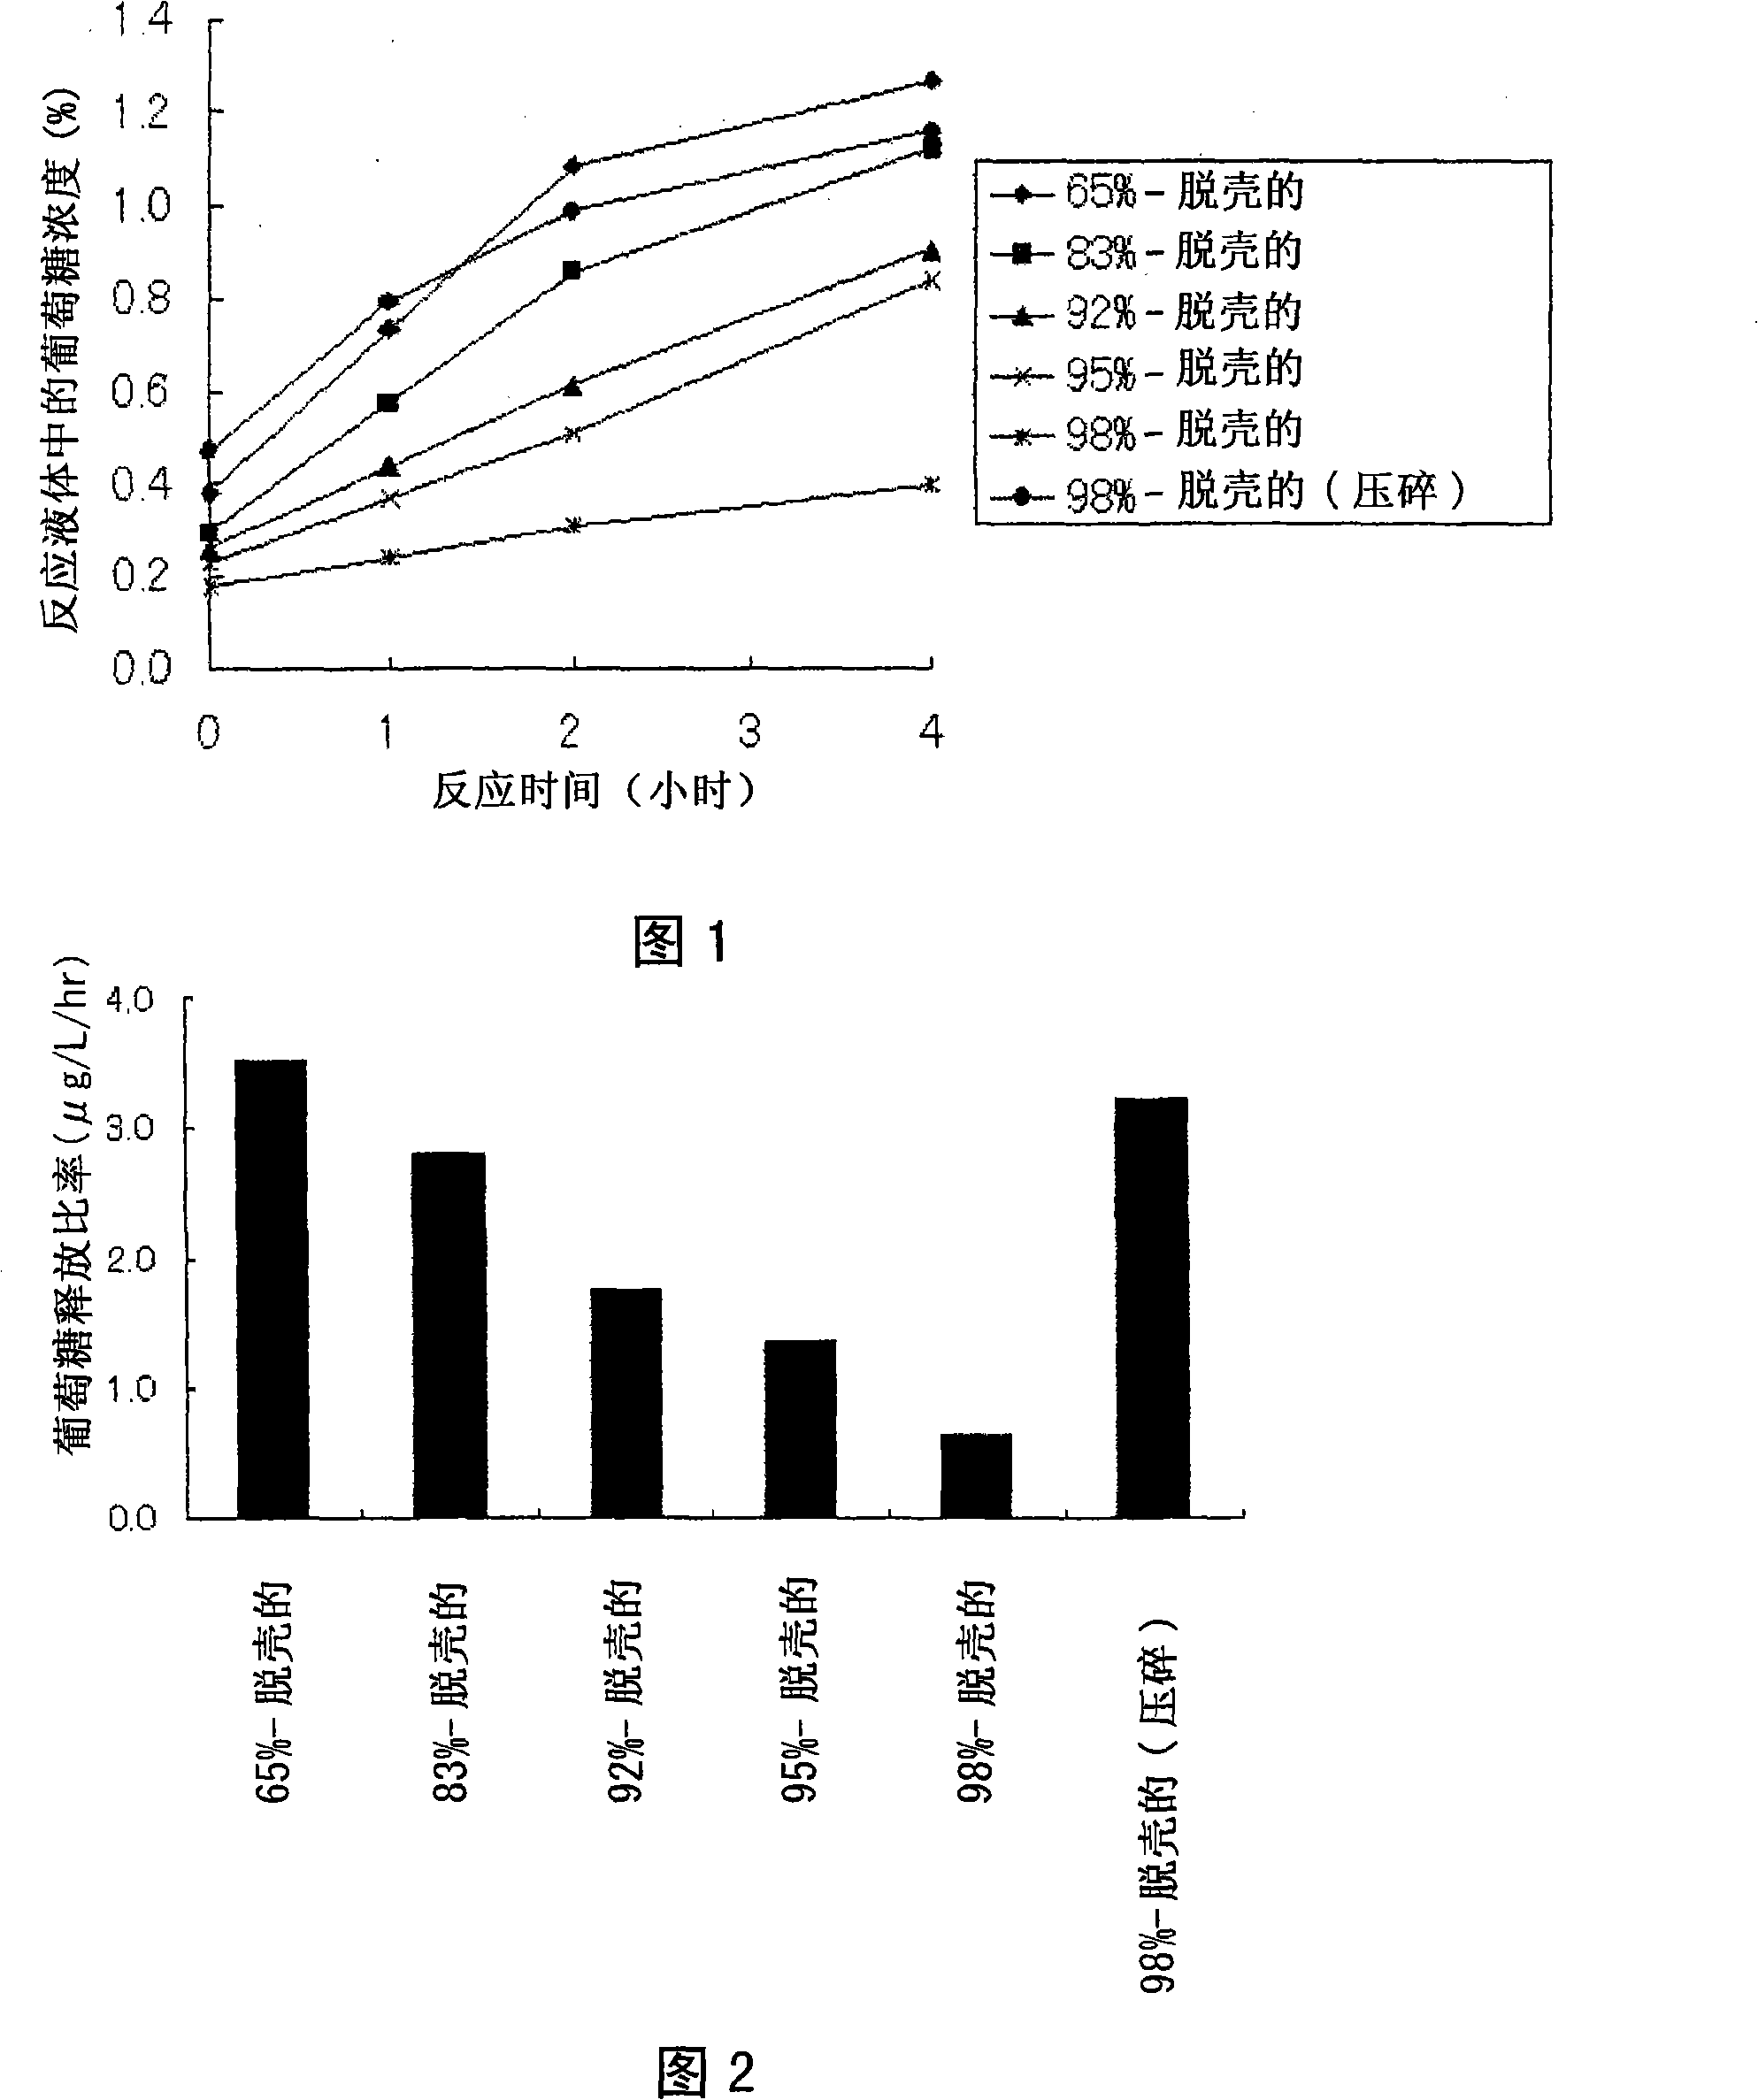 Method of producing fungal culture